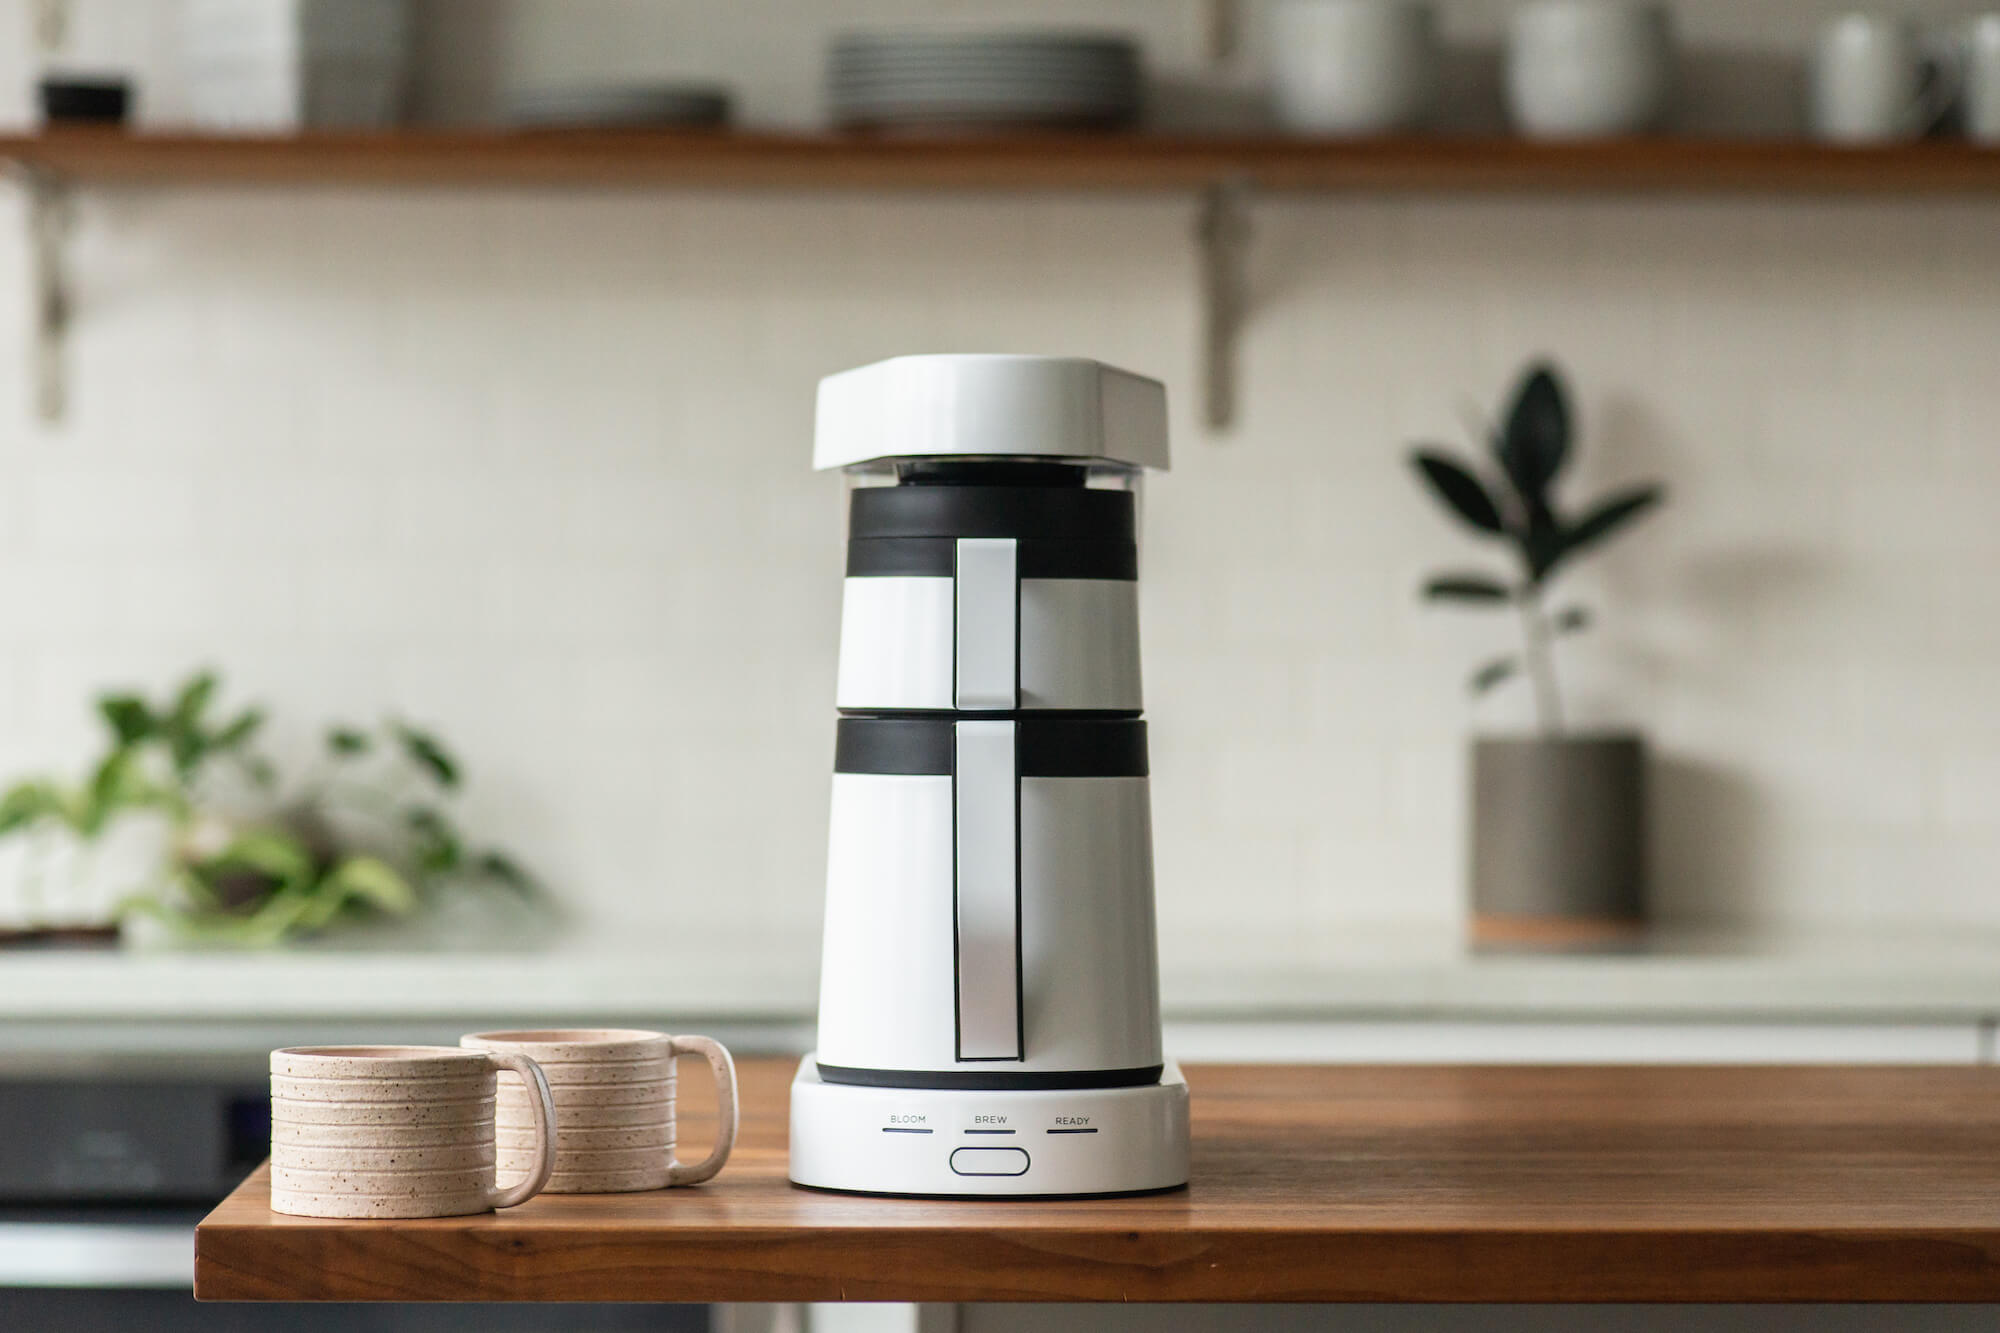 Ratio Six Coffee Maker Review: A Brilliant Hands-Free Pour-Over Coffee Maker